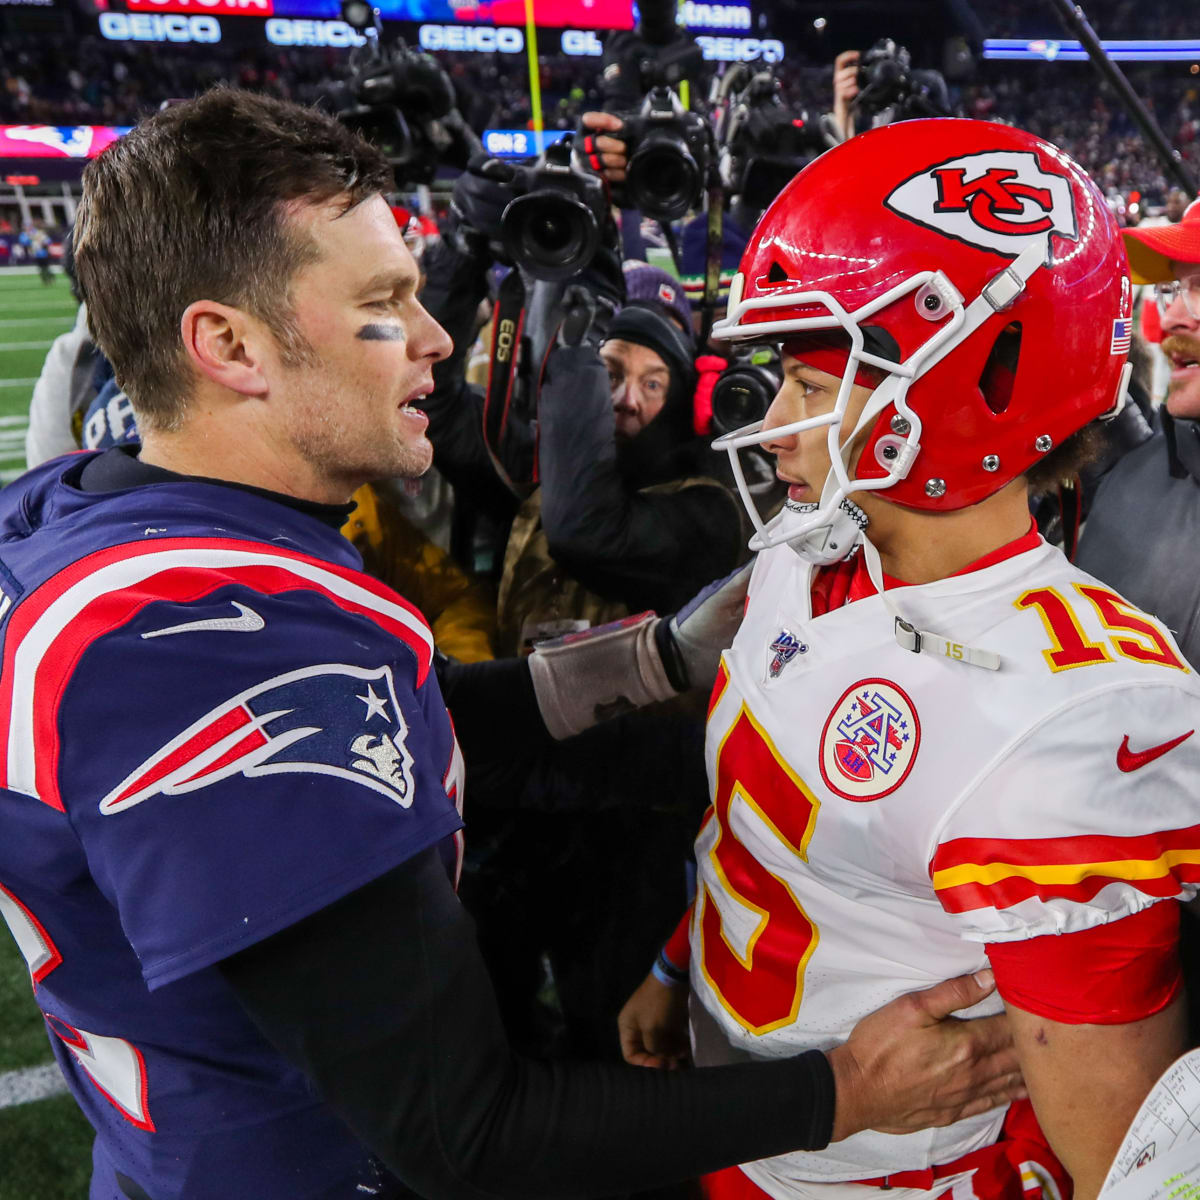 Patrick Mahomes is now #1 in NFL merchandise sales